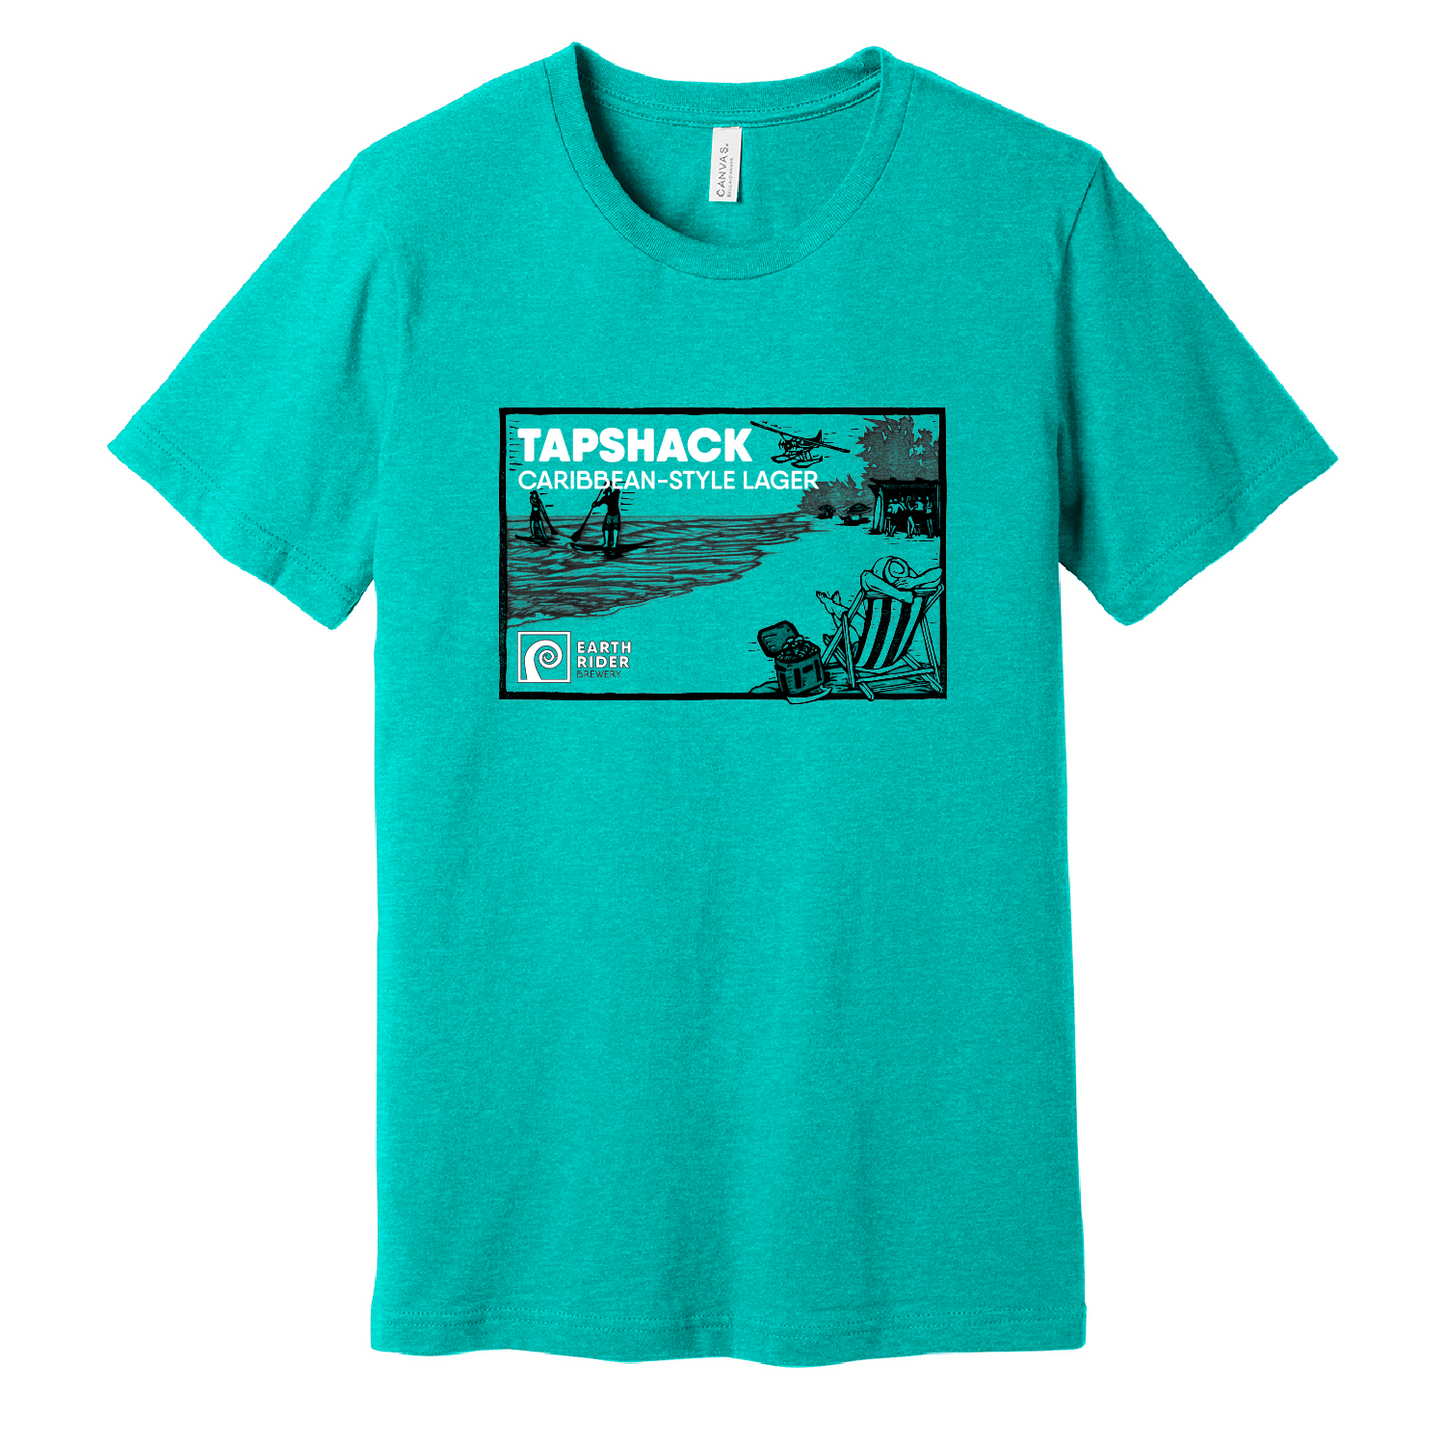 Earth Rider Tap Shack lager Jersey Tee